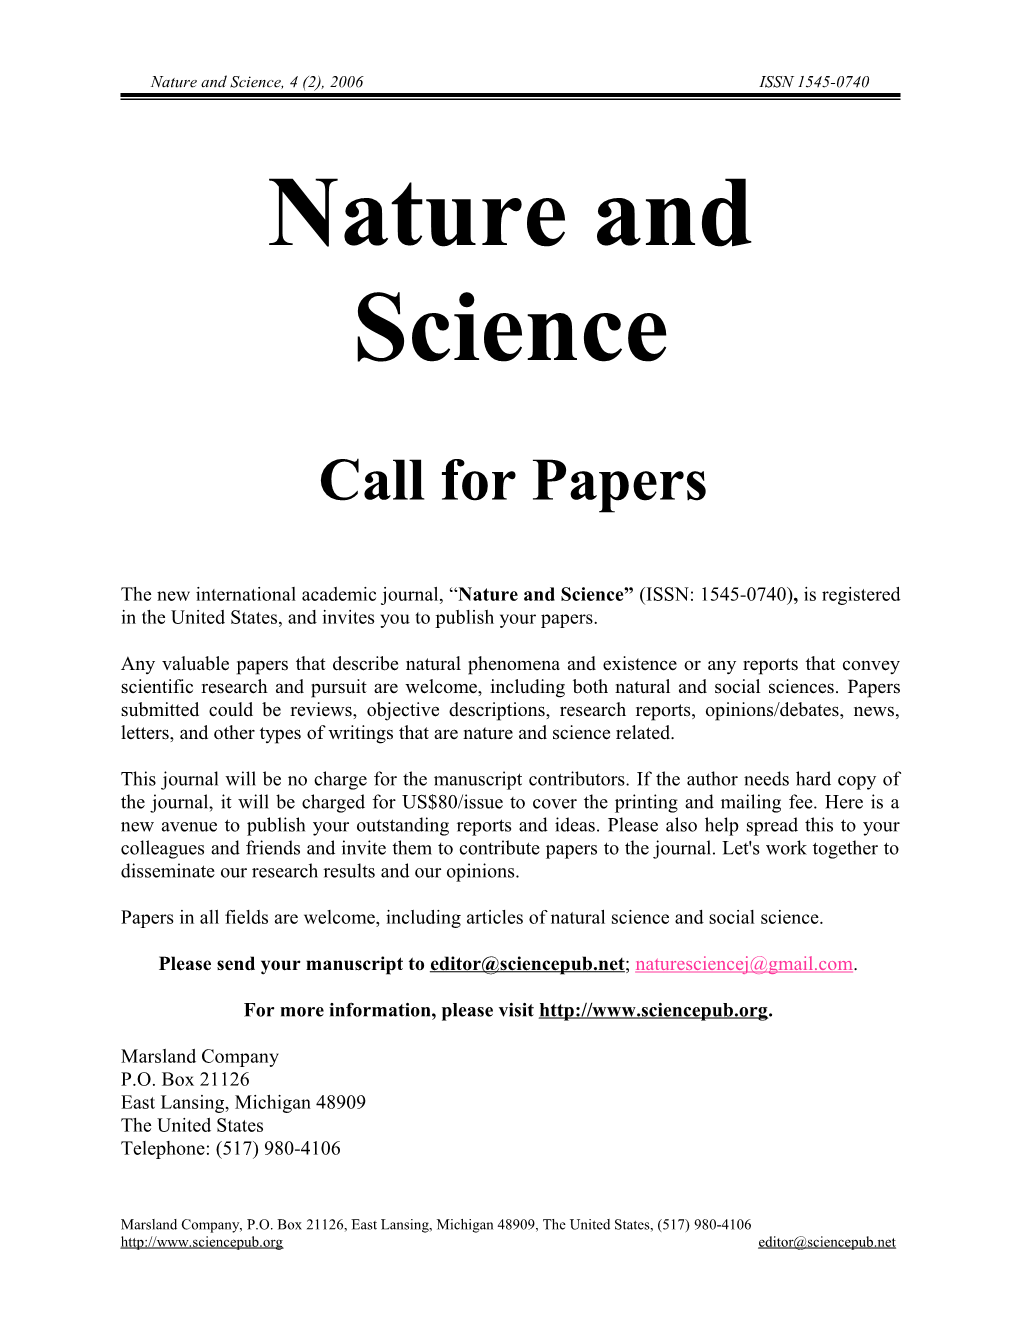 Nature and Science Call for Papers